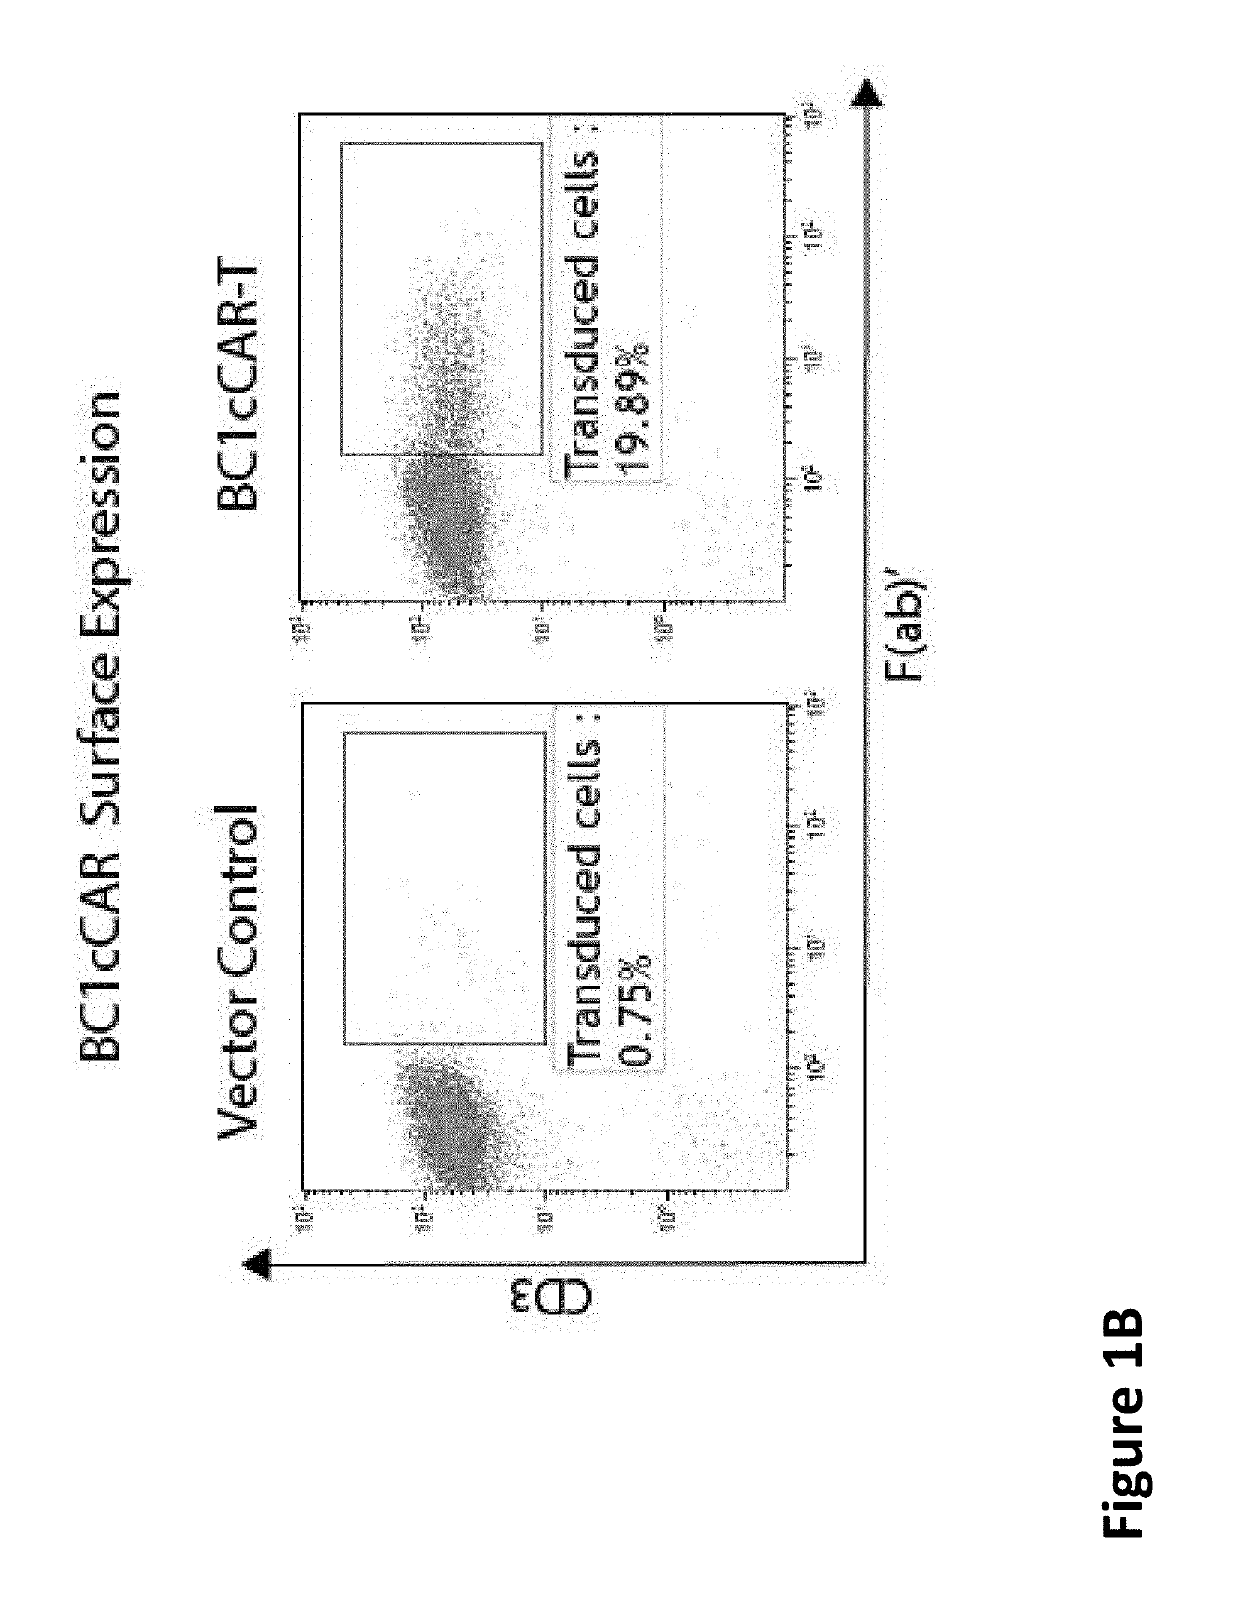 COMPOUND CHIMERIC ANTIGEN RECEPTOR (cCAR) TARGETING MULTIPLE ANTIGENS, COMPOSITIONS AND METHODS OF USE THEREOF